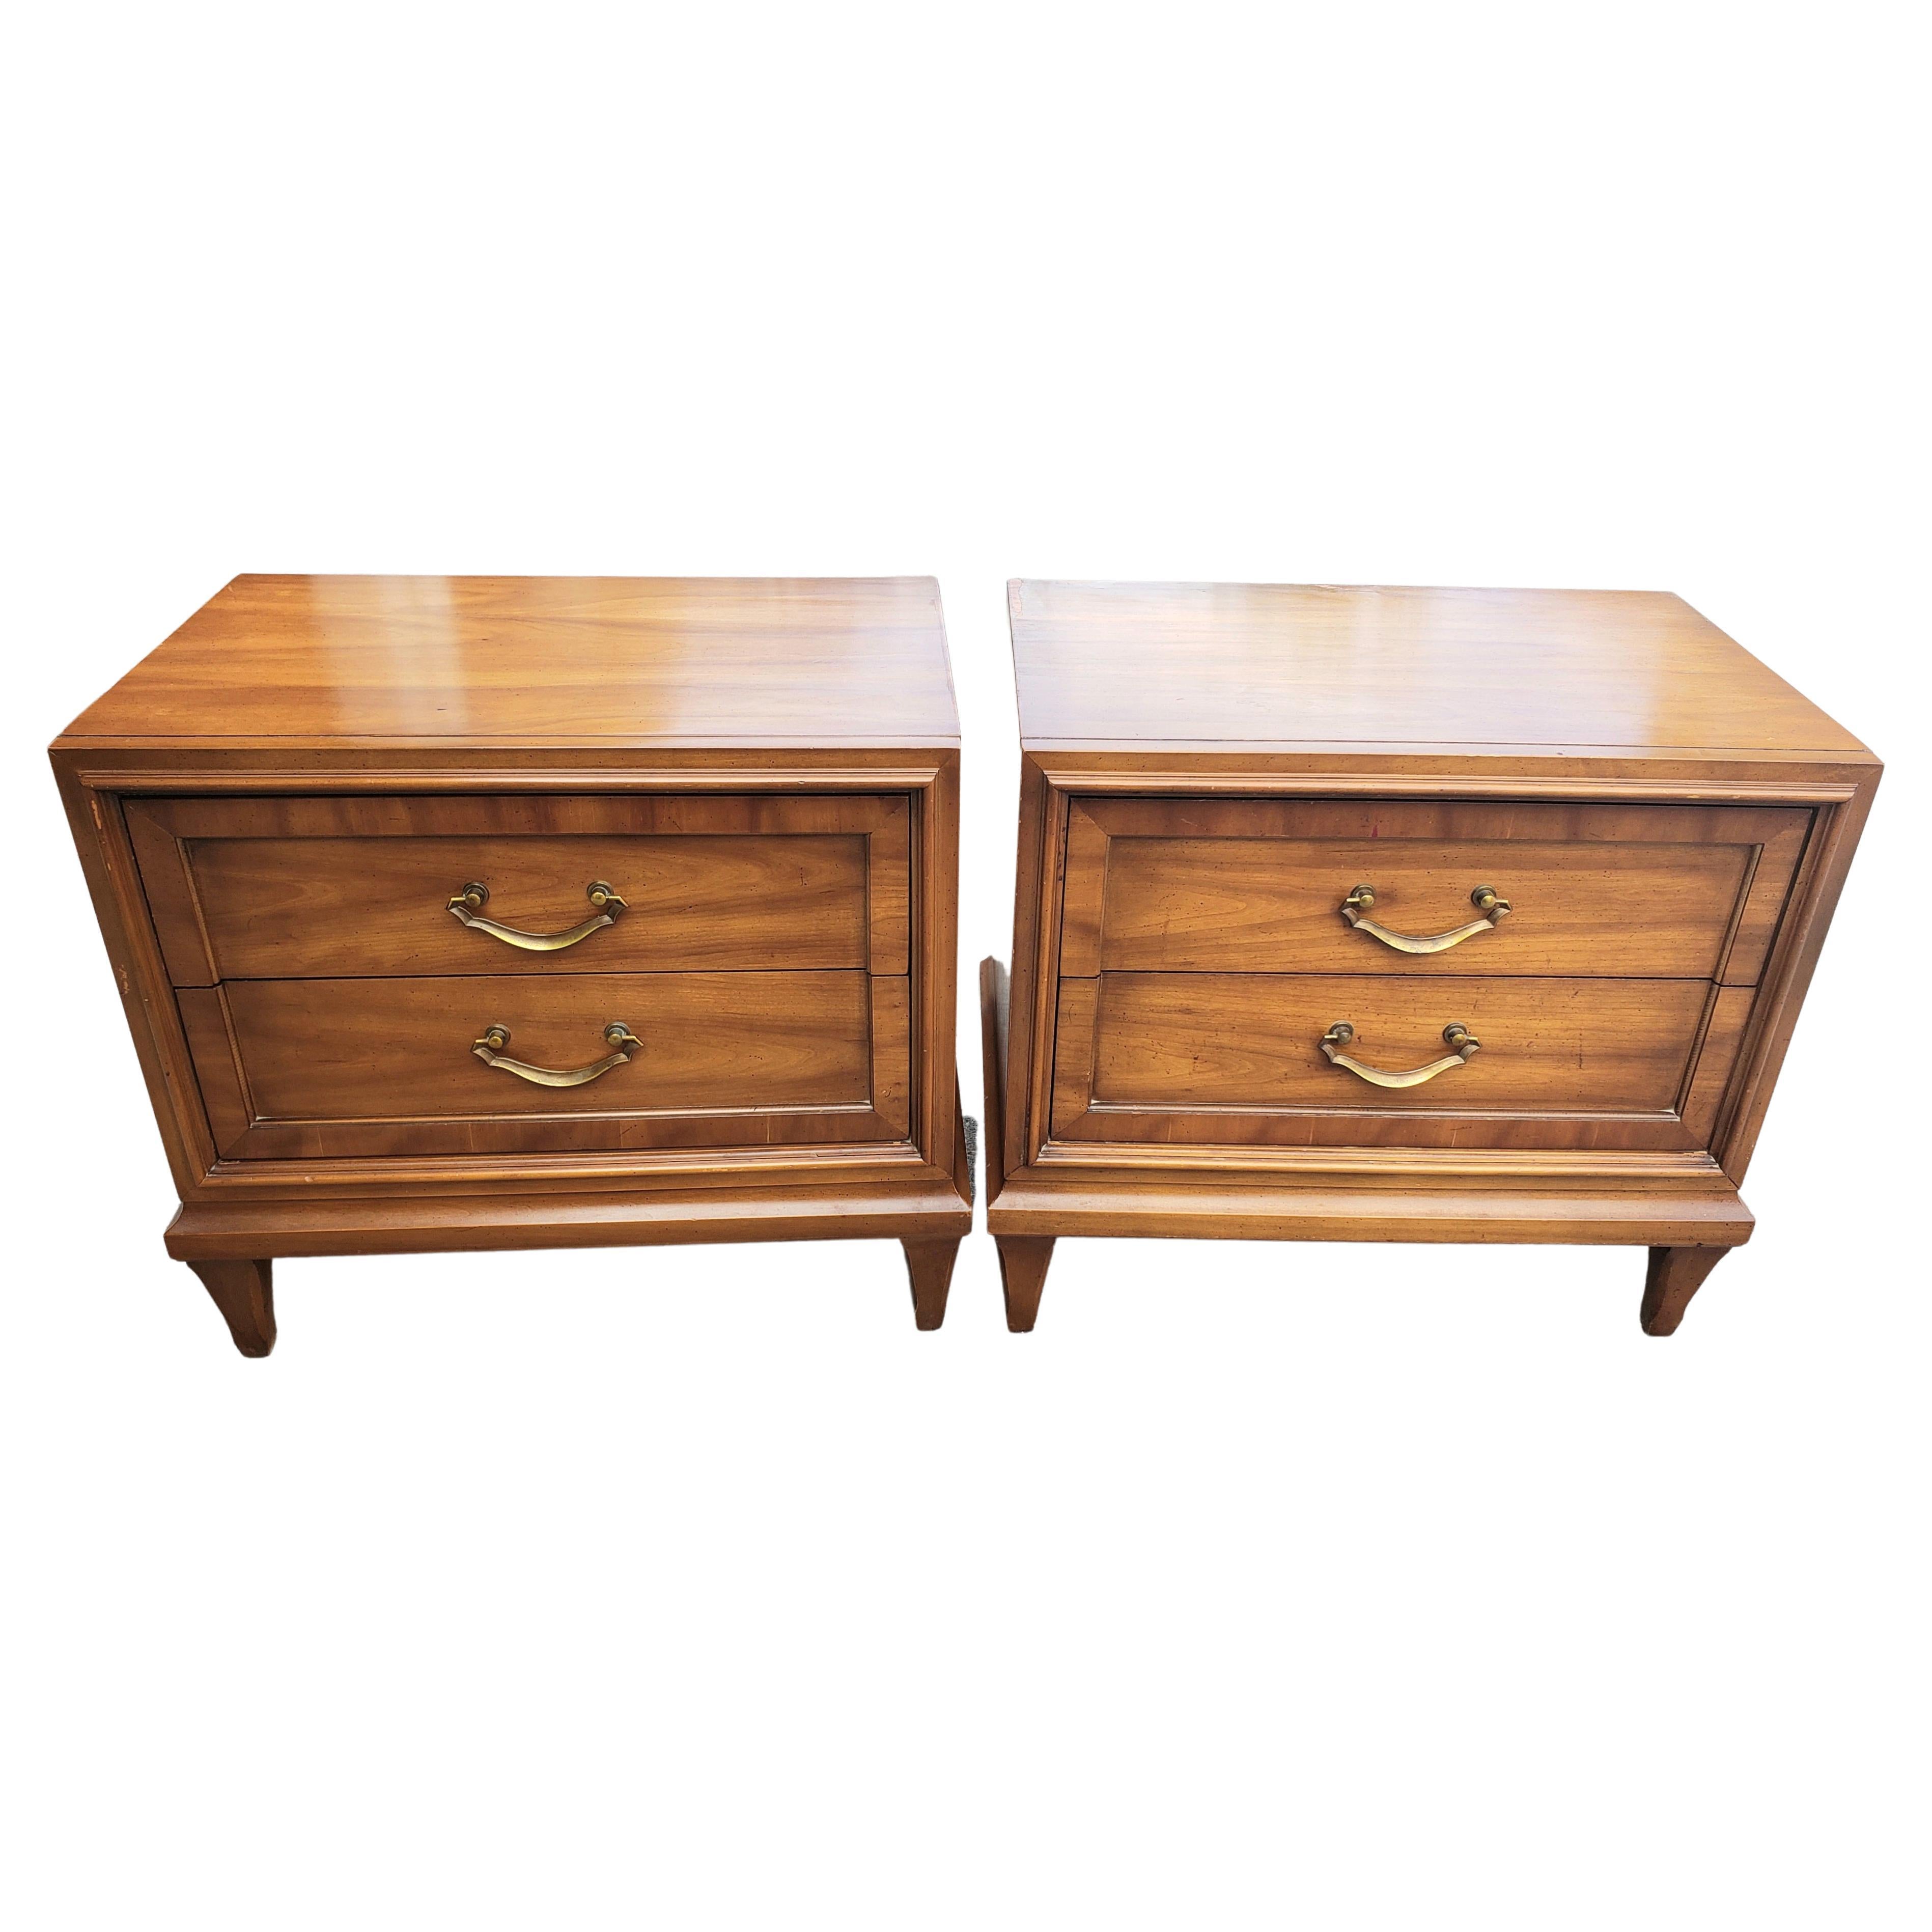 Baker Furniture Attributed Walnut Nightstands Side Tables, a Pair